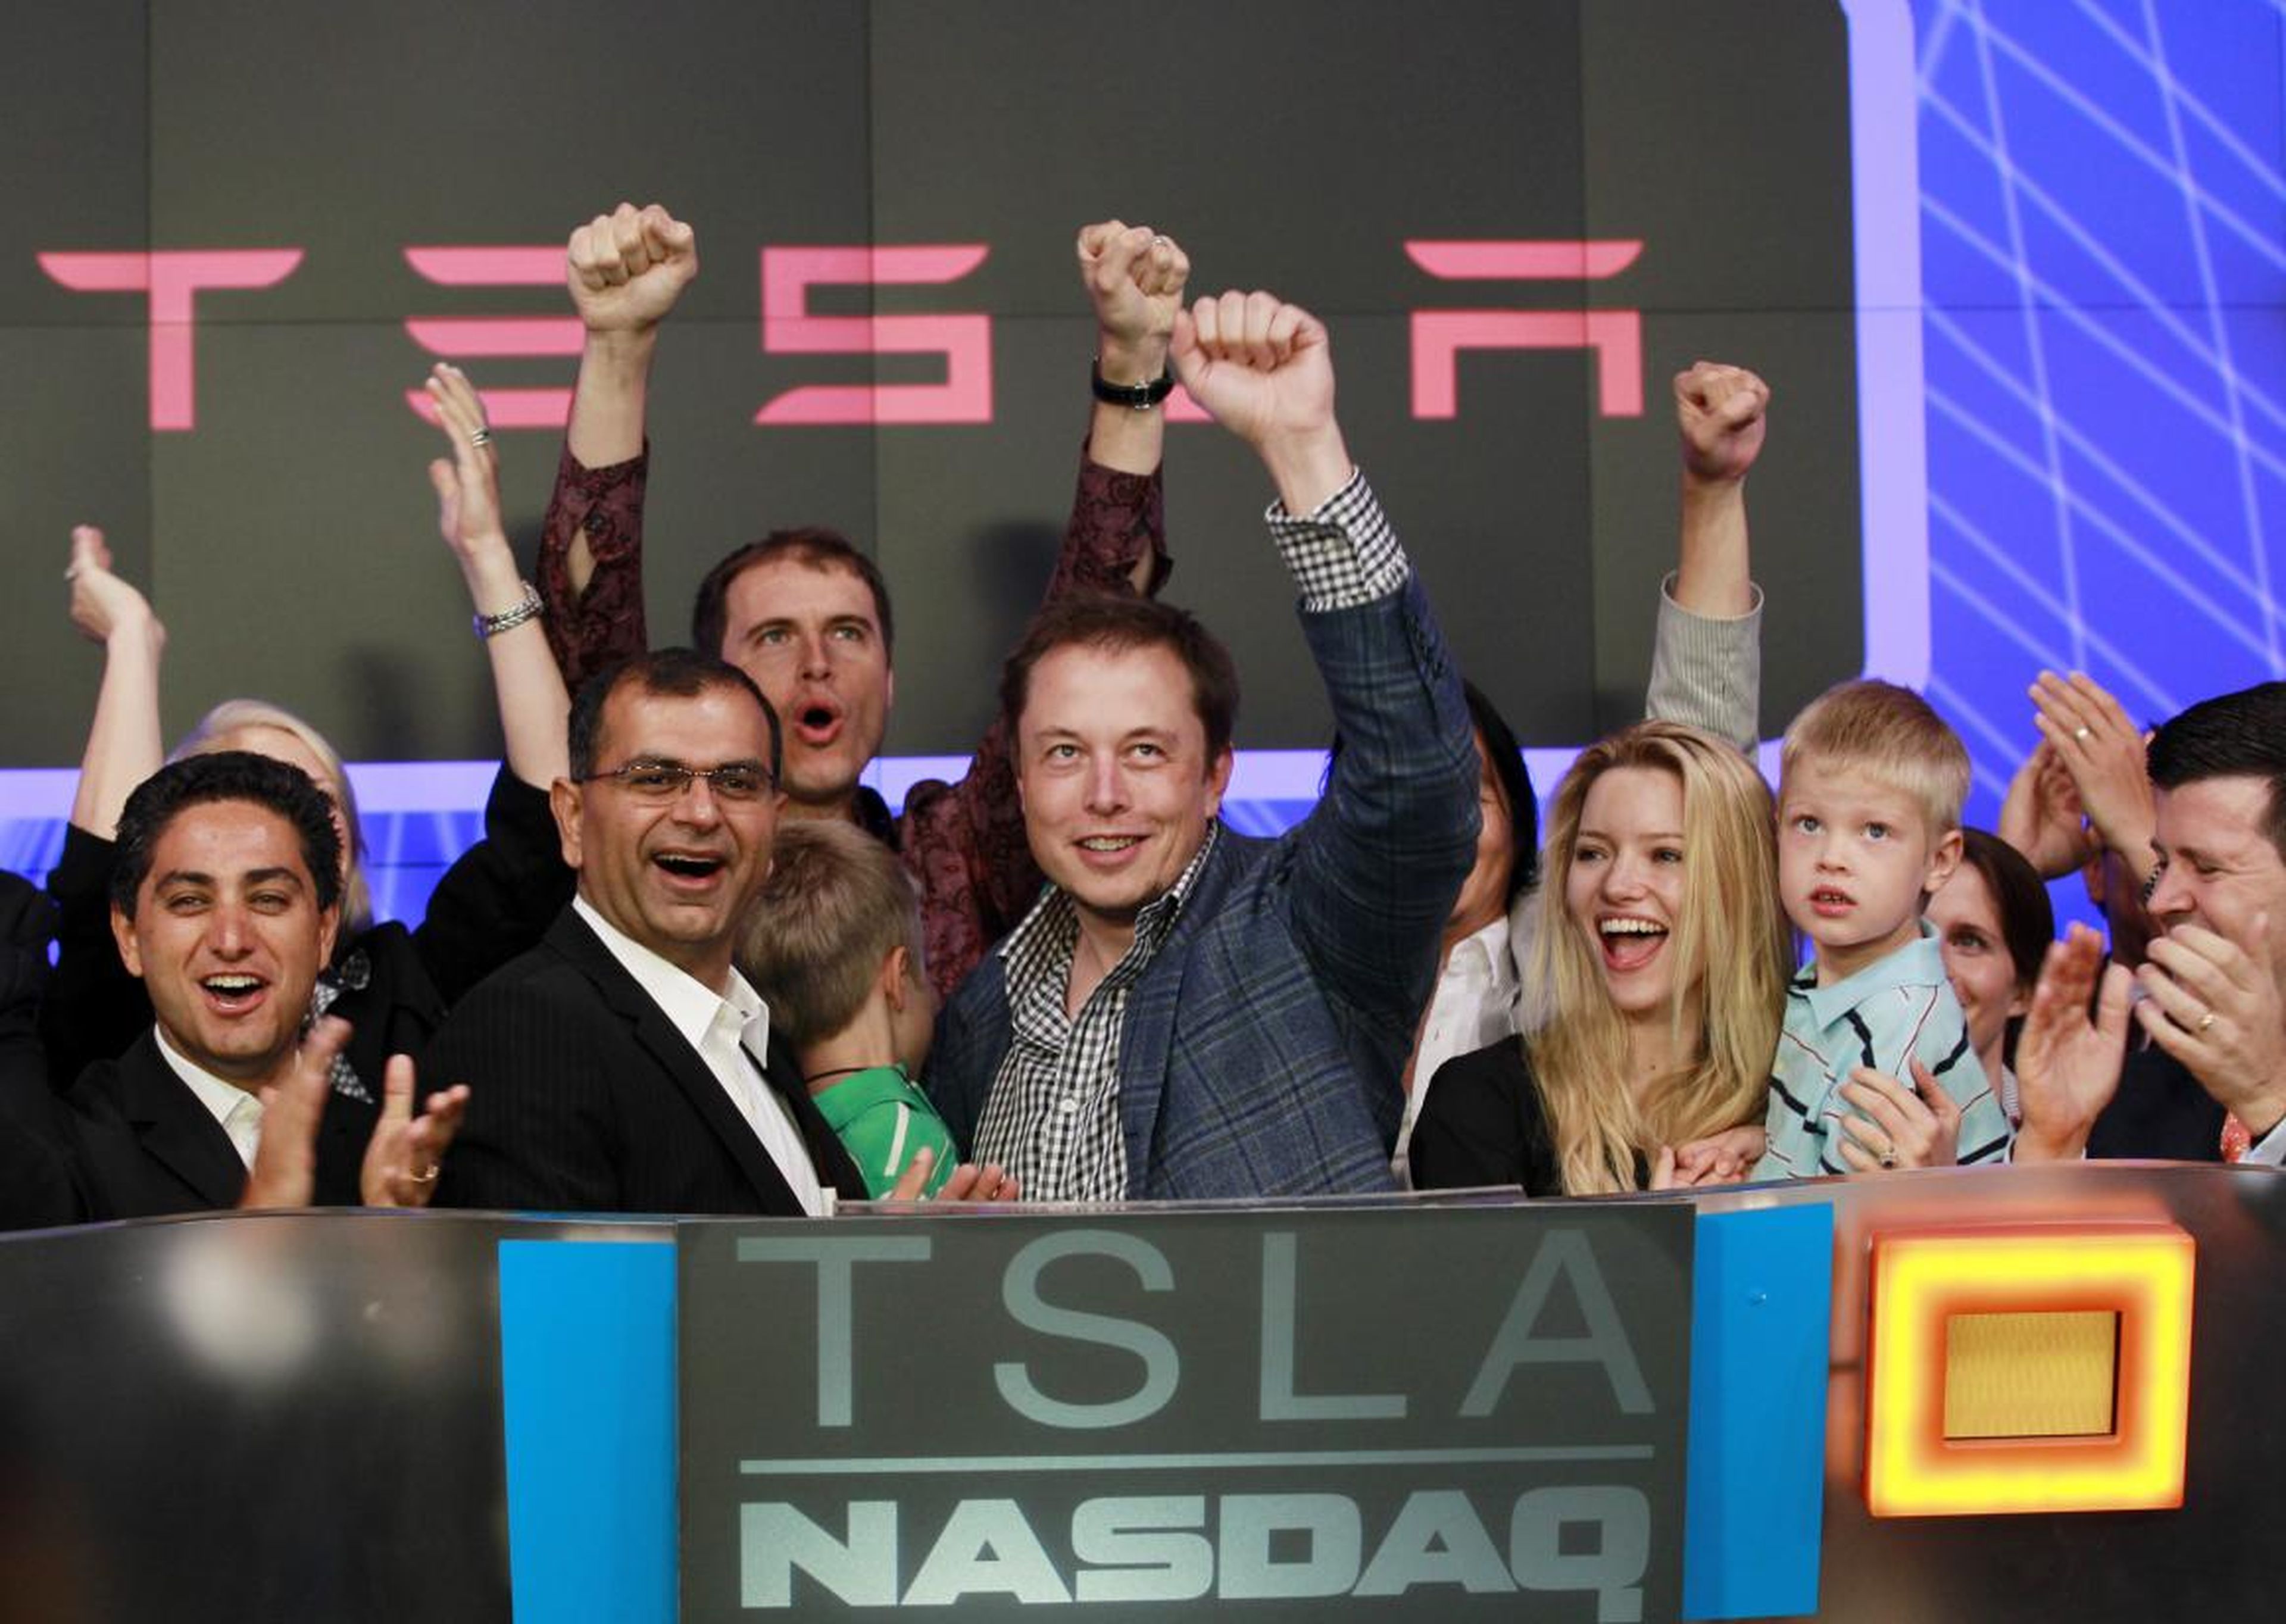 By 2010, things had seriously turned around, with Tesla holding a successful initial public offering.